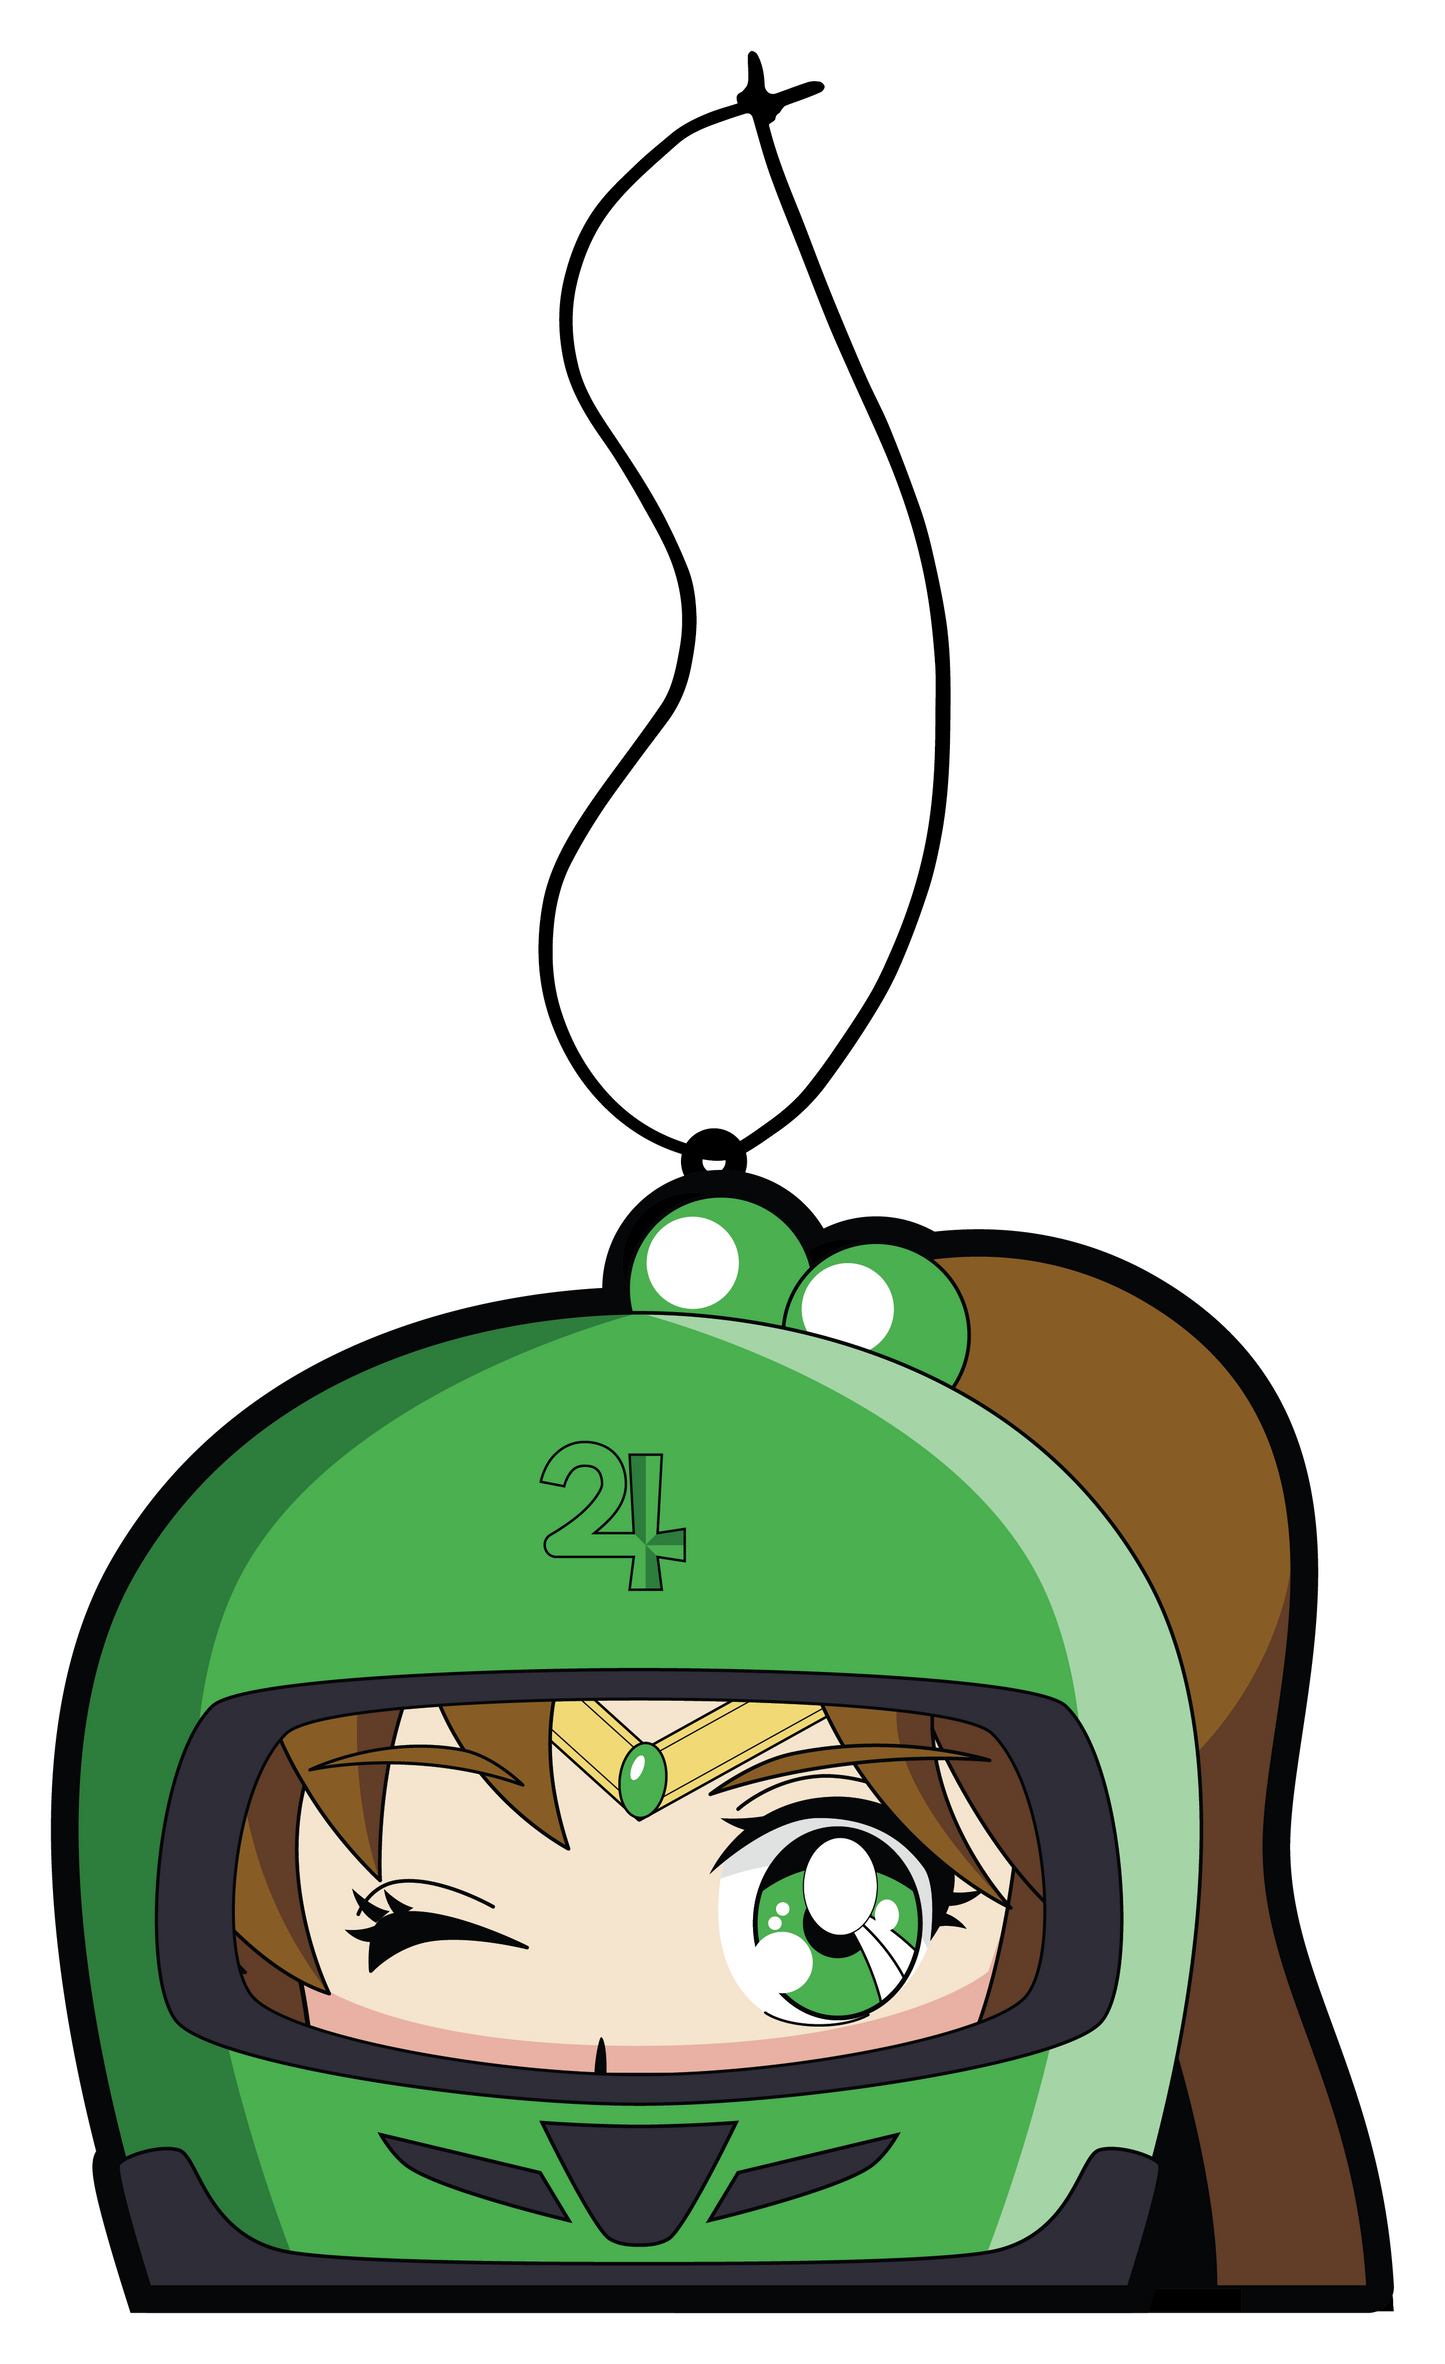 Anime Jupiter air freshener hanging from black string. Green helmet with brown hair pony tail anime japanese girl character with green eyes.